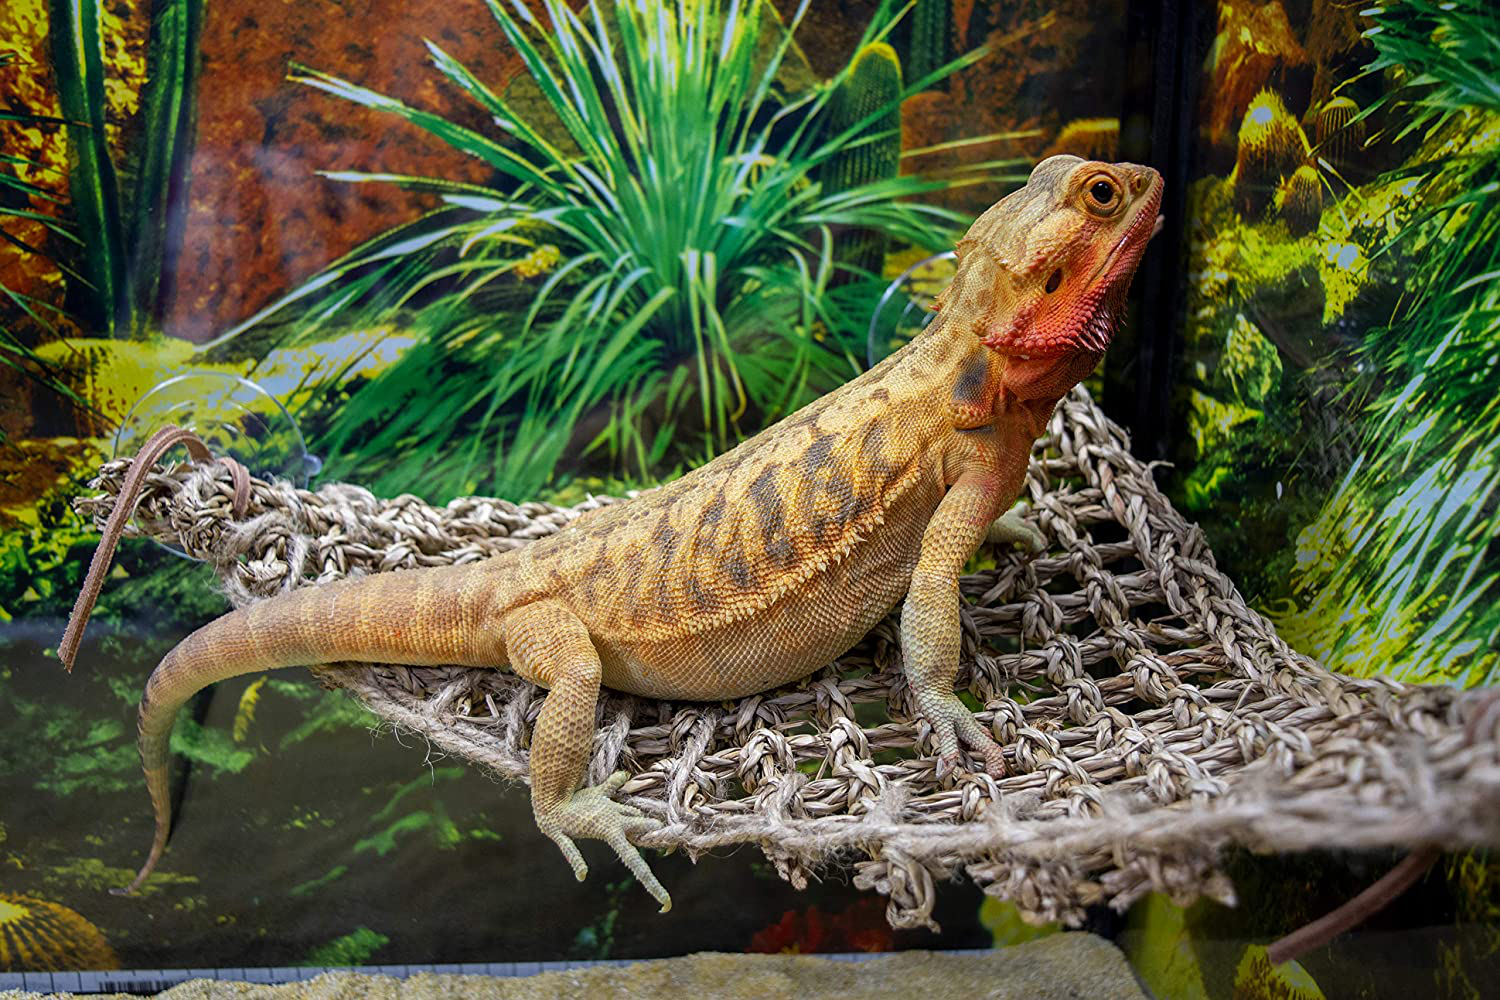 Penn-Plax Reptology Lizard Loungers – 100% Natural Seagrass Fiber – Great for Bearded Dragons, Anoles, Geckos, and Other Reptiles – 6 Sizes & Styles Available